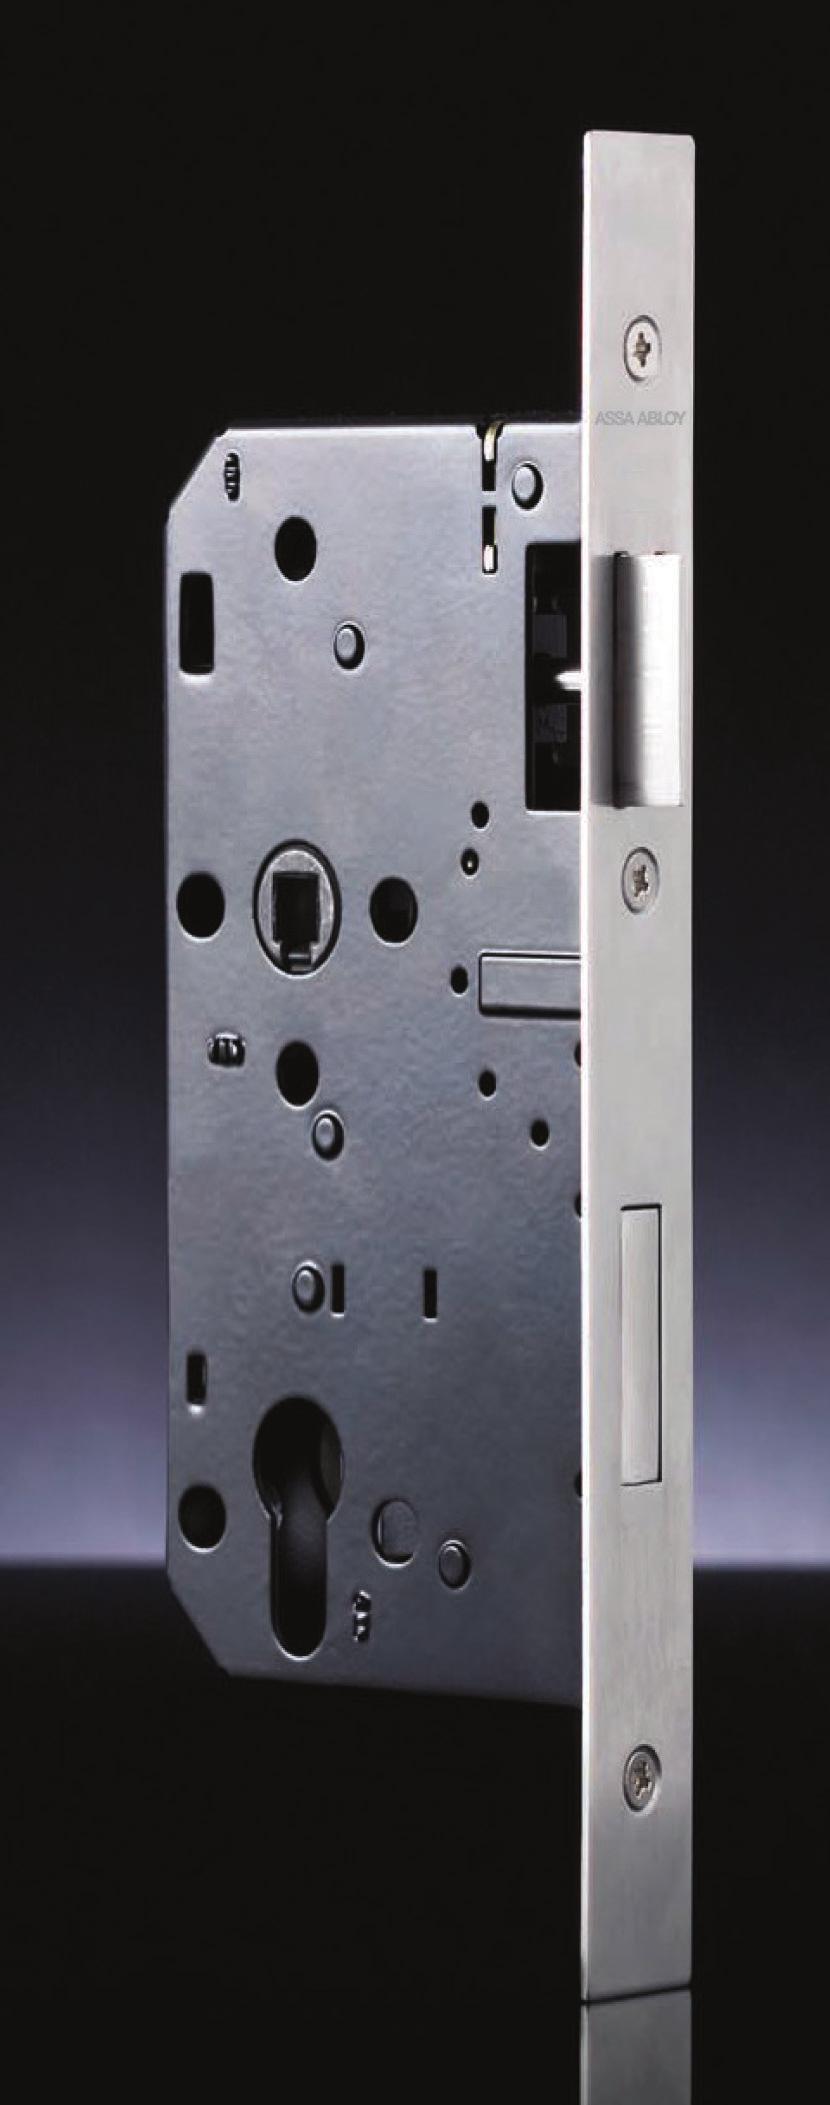 ASSA ABLOY Mortise Lockcase Mortise Lockcase AA5100 Series Key features: Made of SS 304 200,000 cycles tested 8 Latching functions Fire rated Non-handed - latch reversible High corrosion resistance